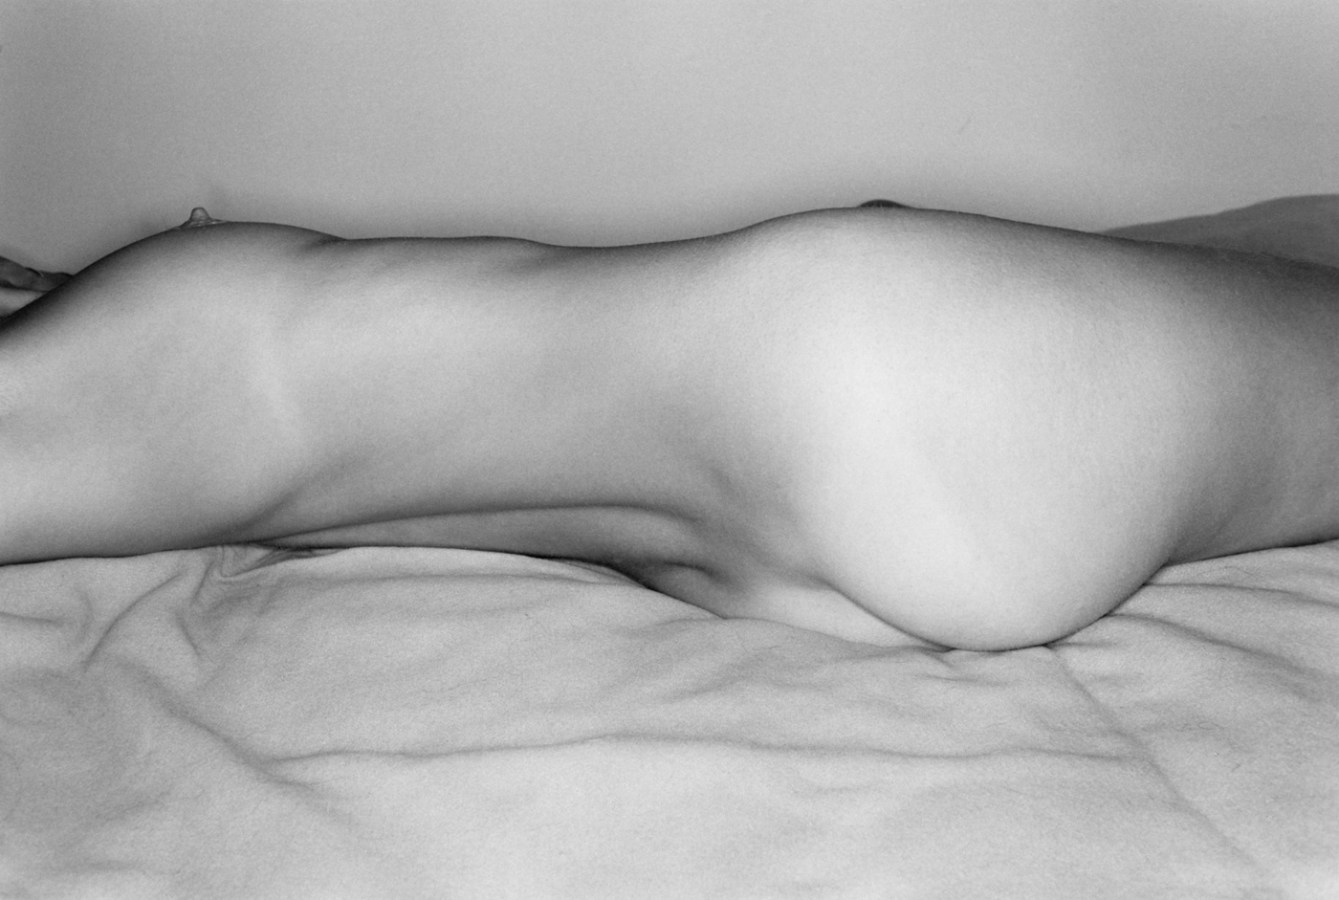 A black and white photograph of a nude woman's torso